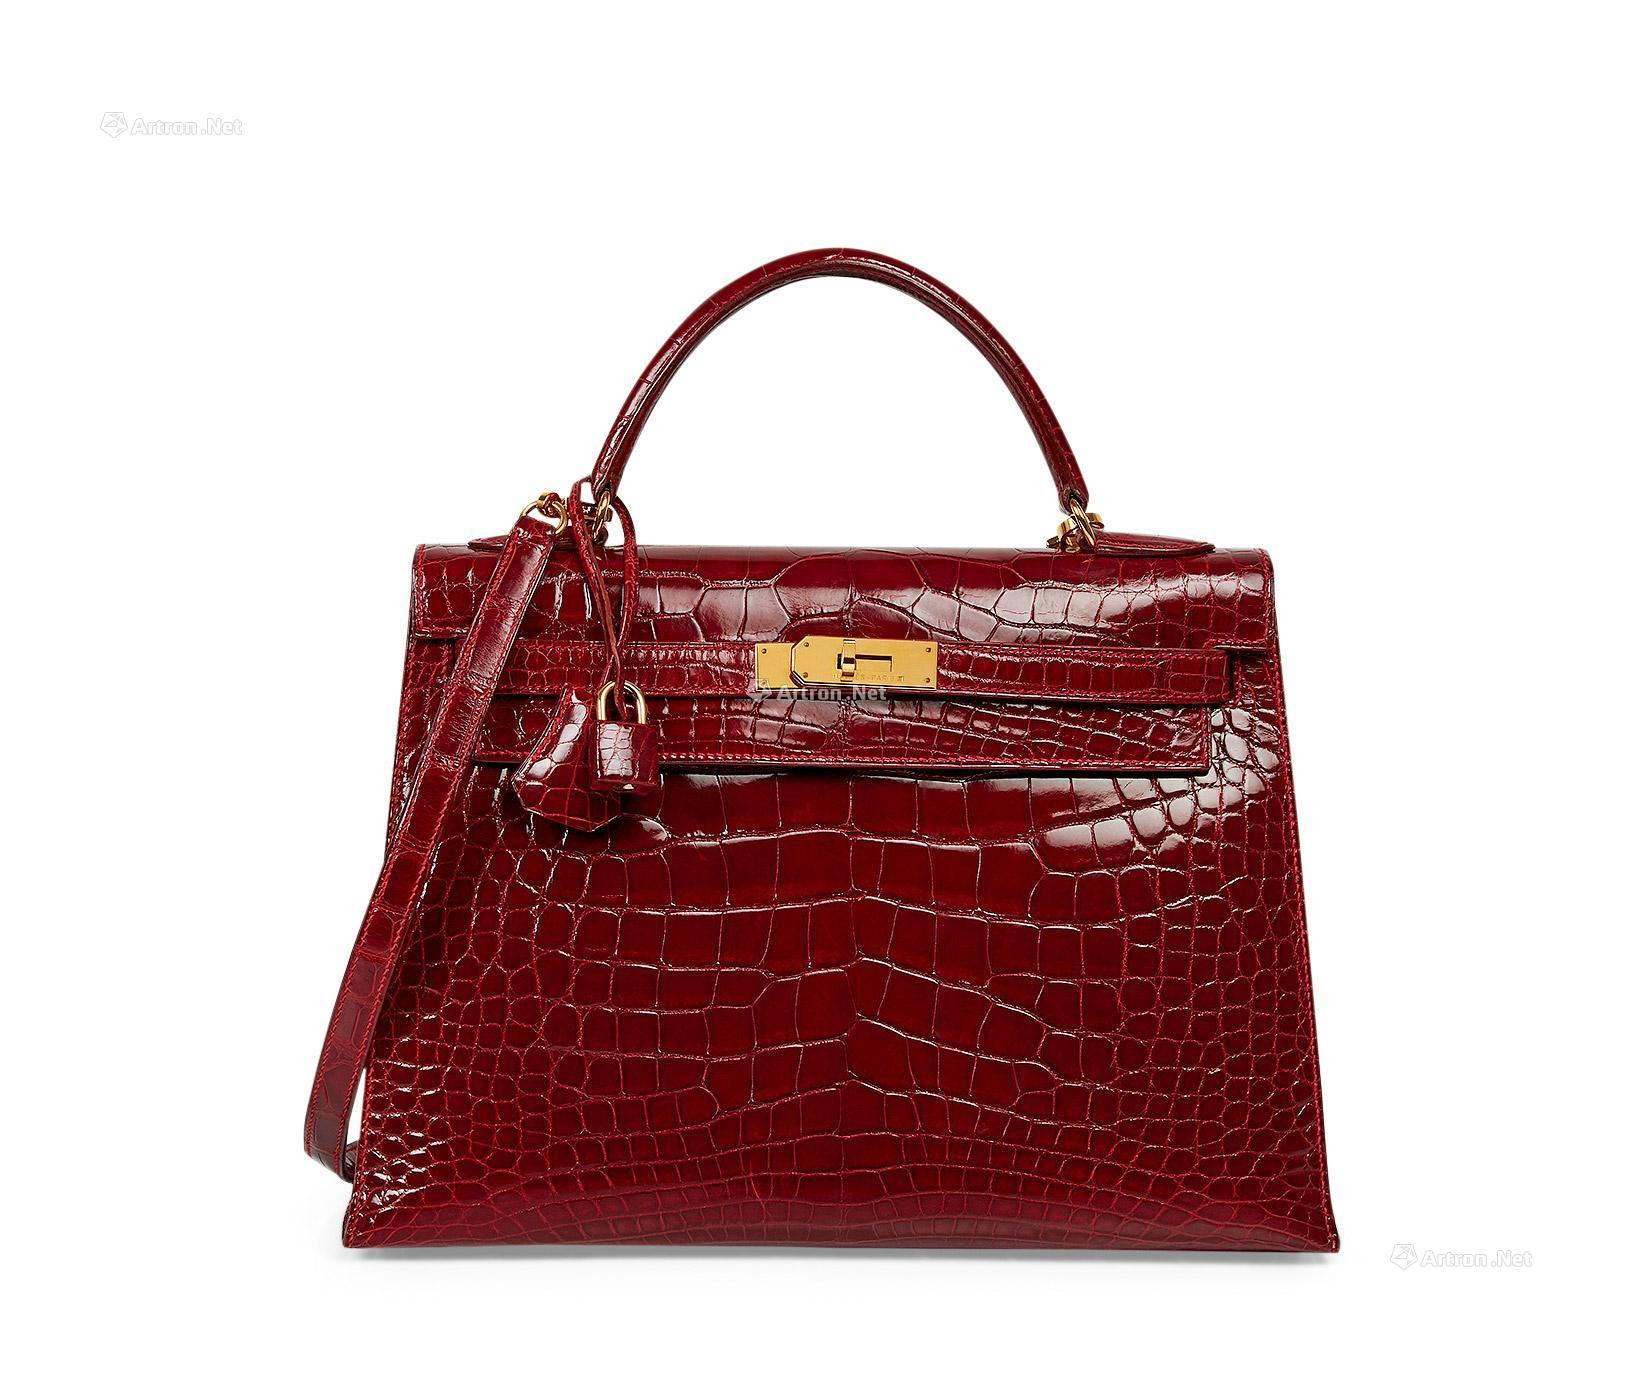 HERMES 1997　A SHINY RED ALLIGATOR KELLY 26 WITH GOLD HARDWARE